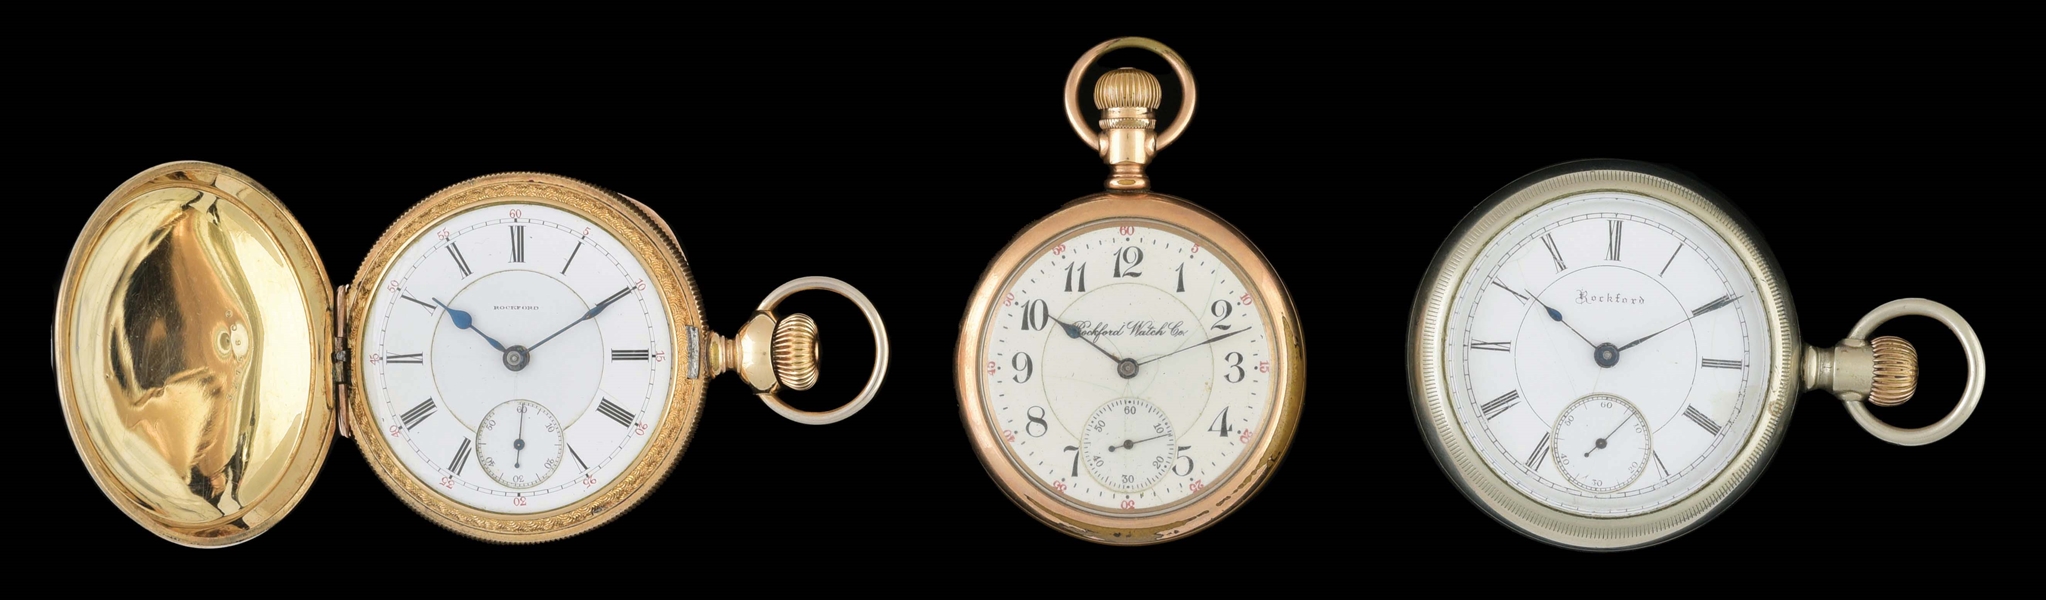 LOT OF 3: ROCKFORD WATCH CO. POCKET WATCHES.